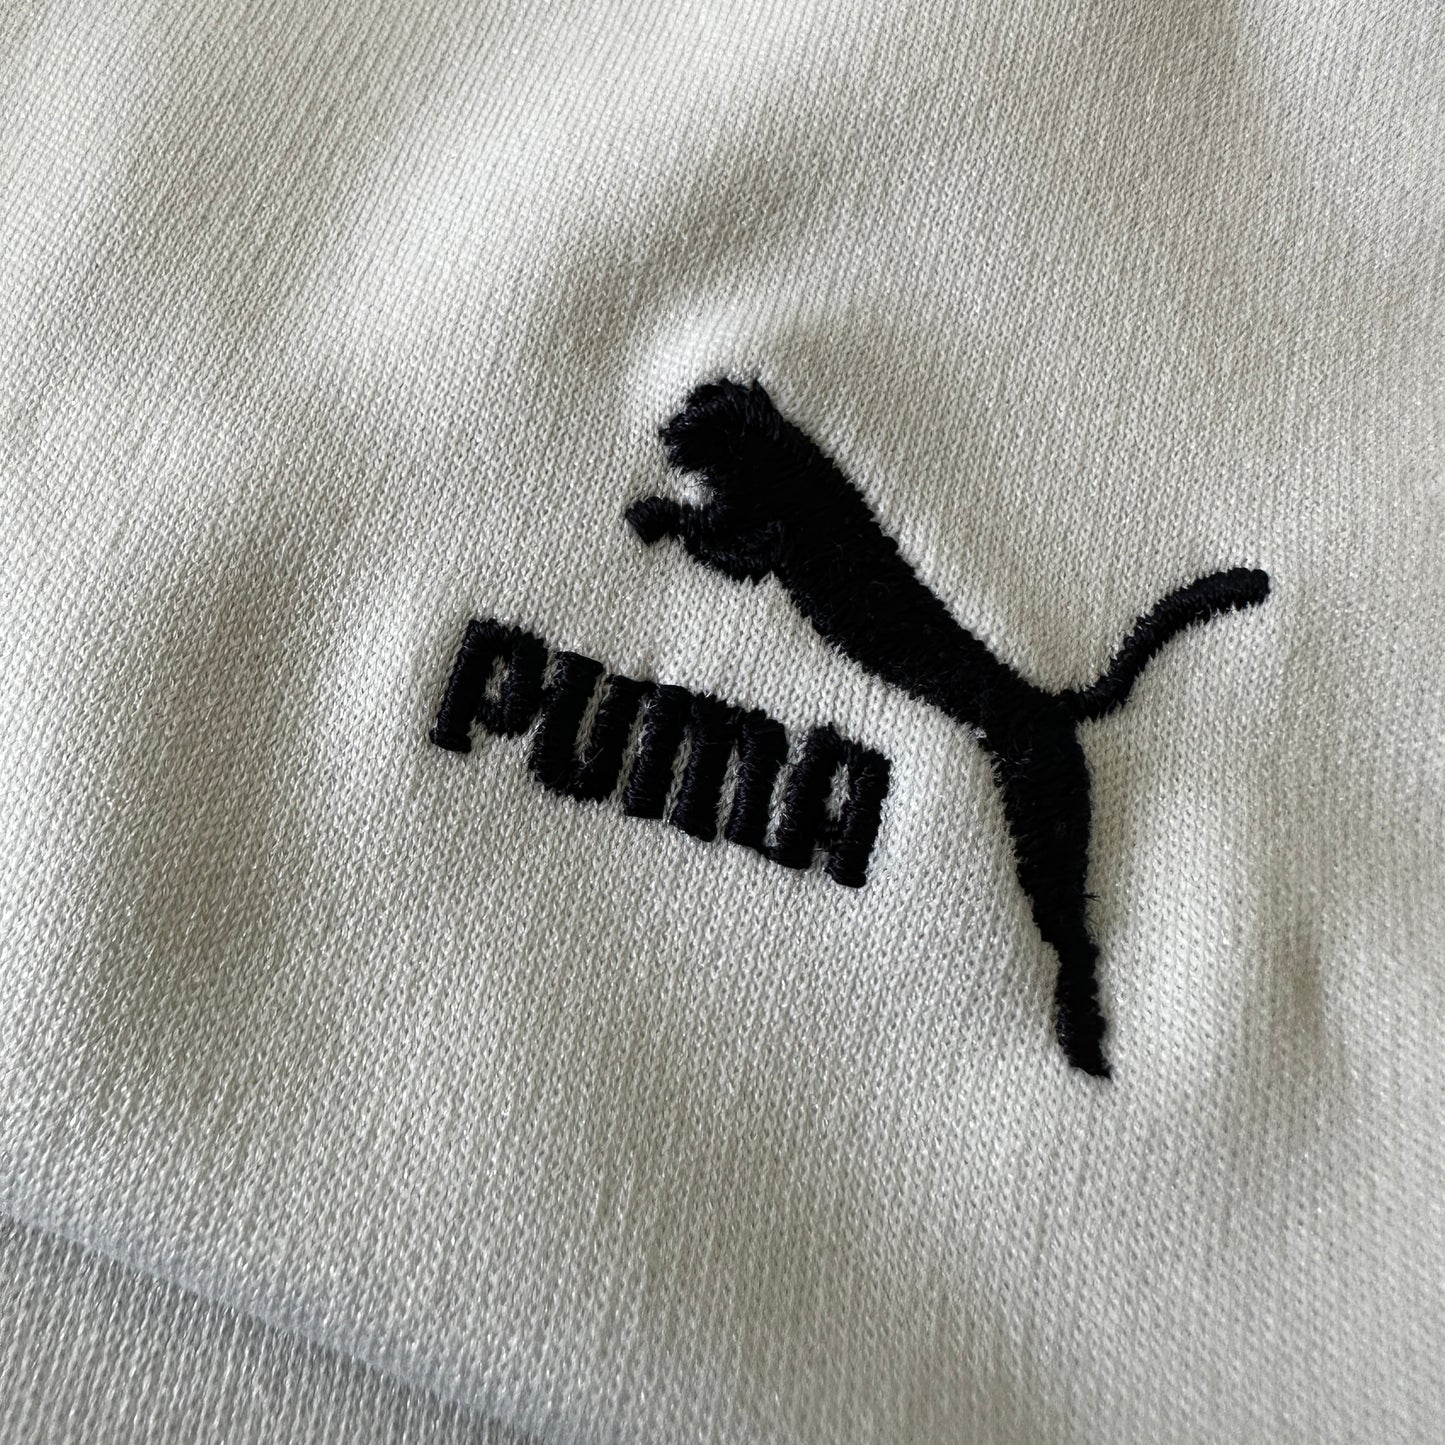 Puma Vintage 80s Tennis Shorts - White - 54 / XL - Made in IItaly